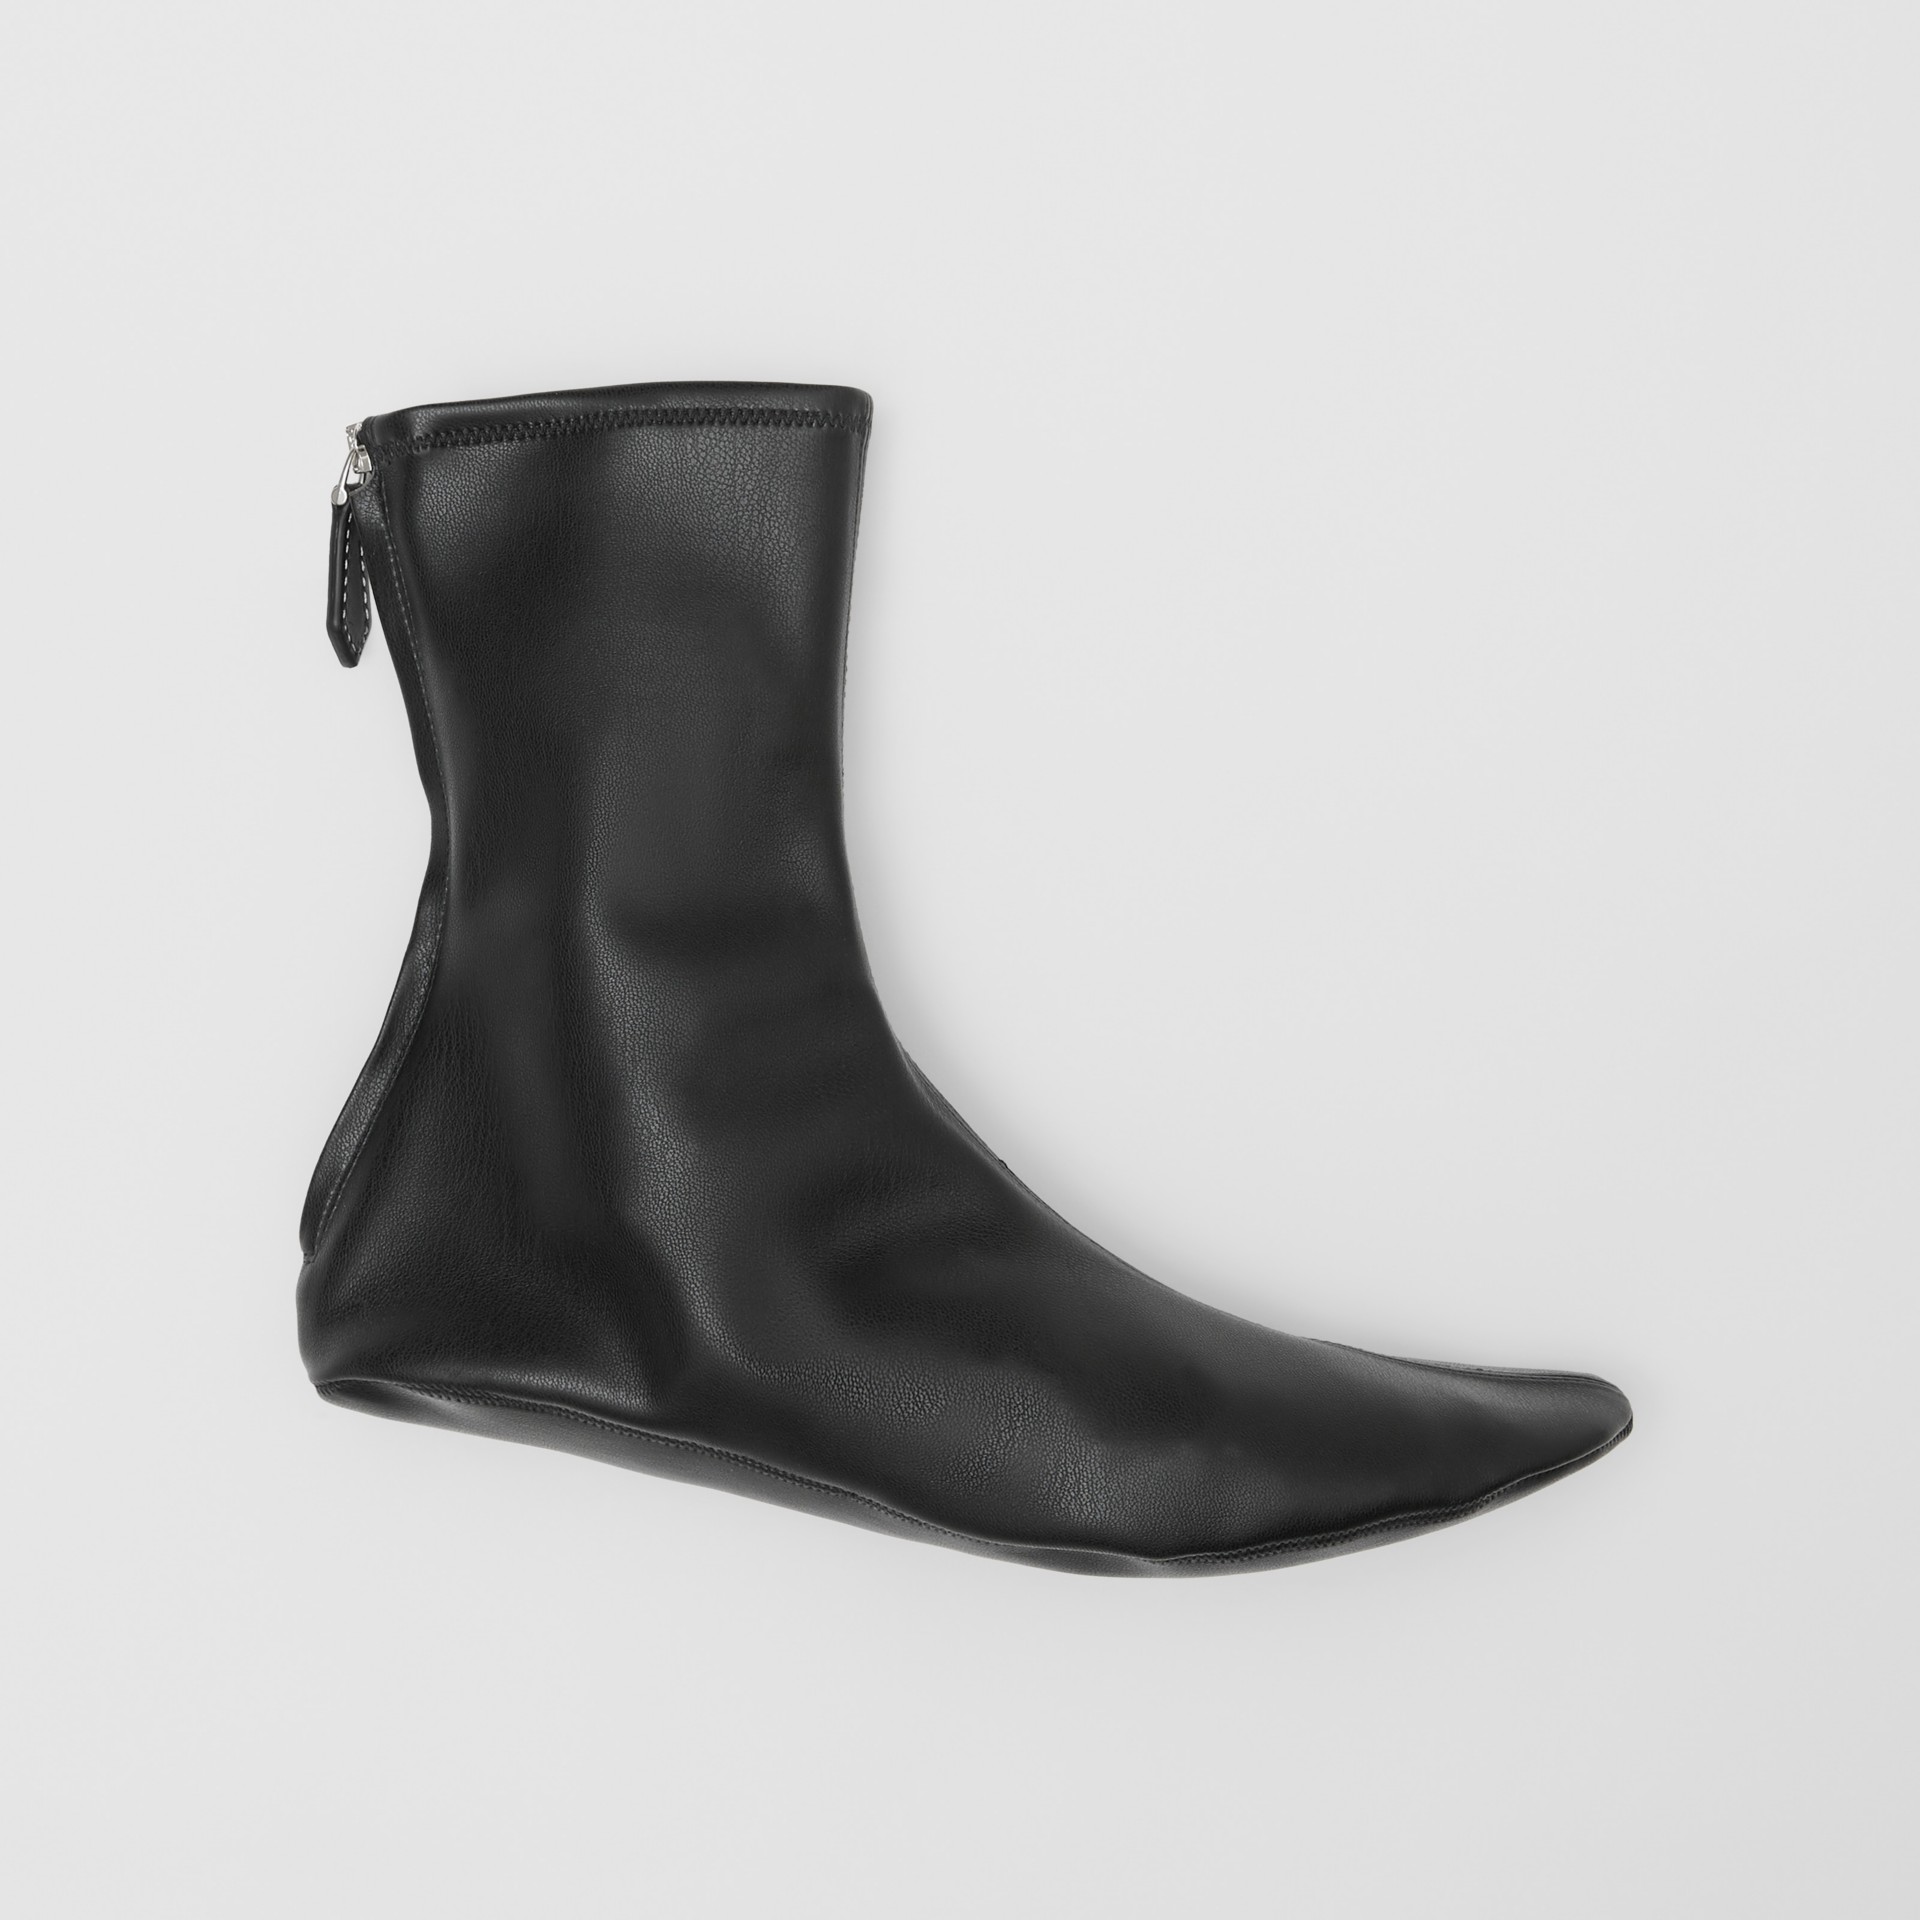 Faux Leather Ankle Socks in Black - Women | Burberry United States